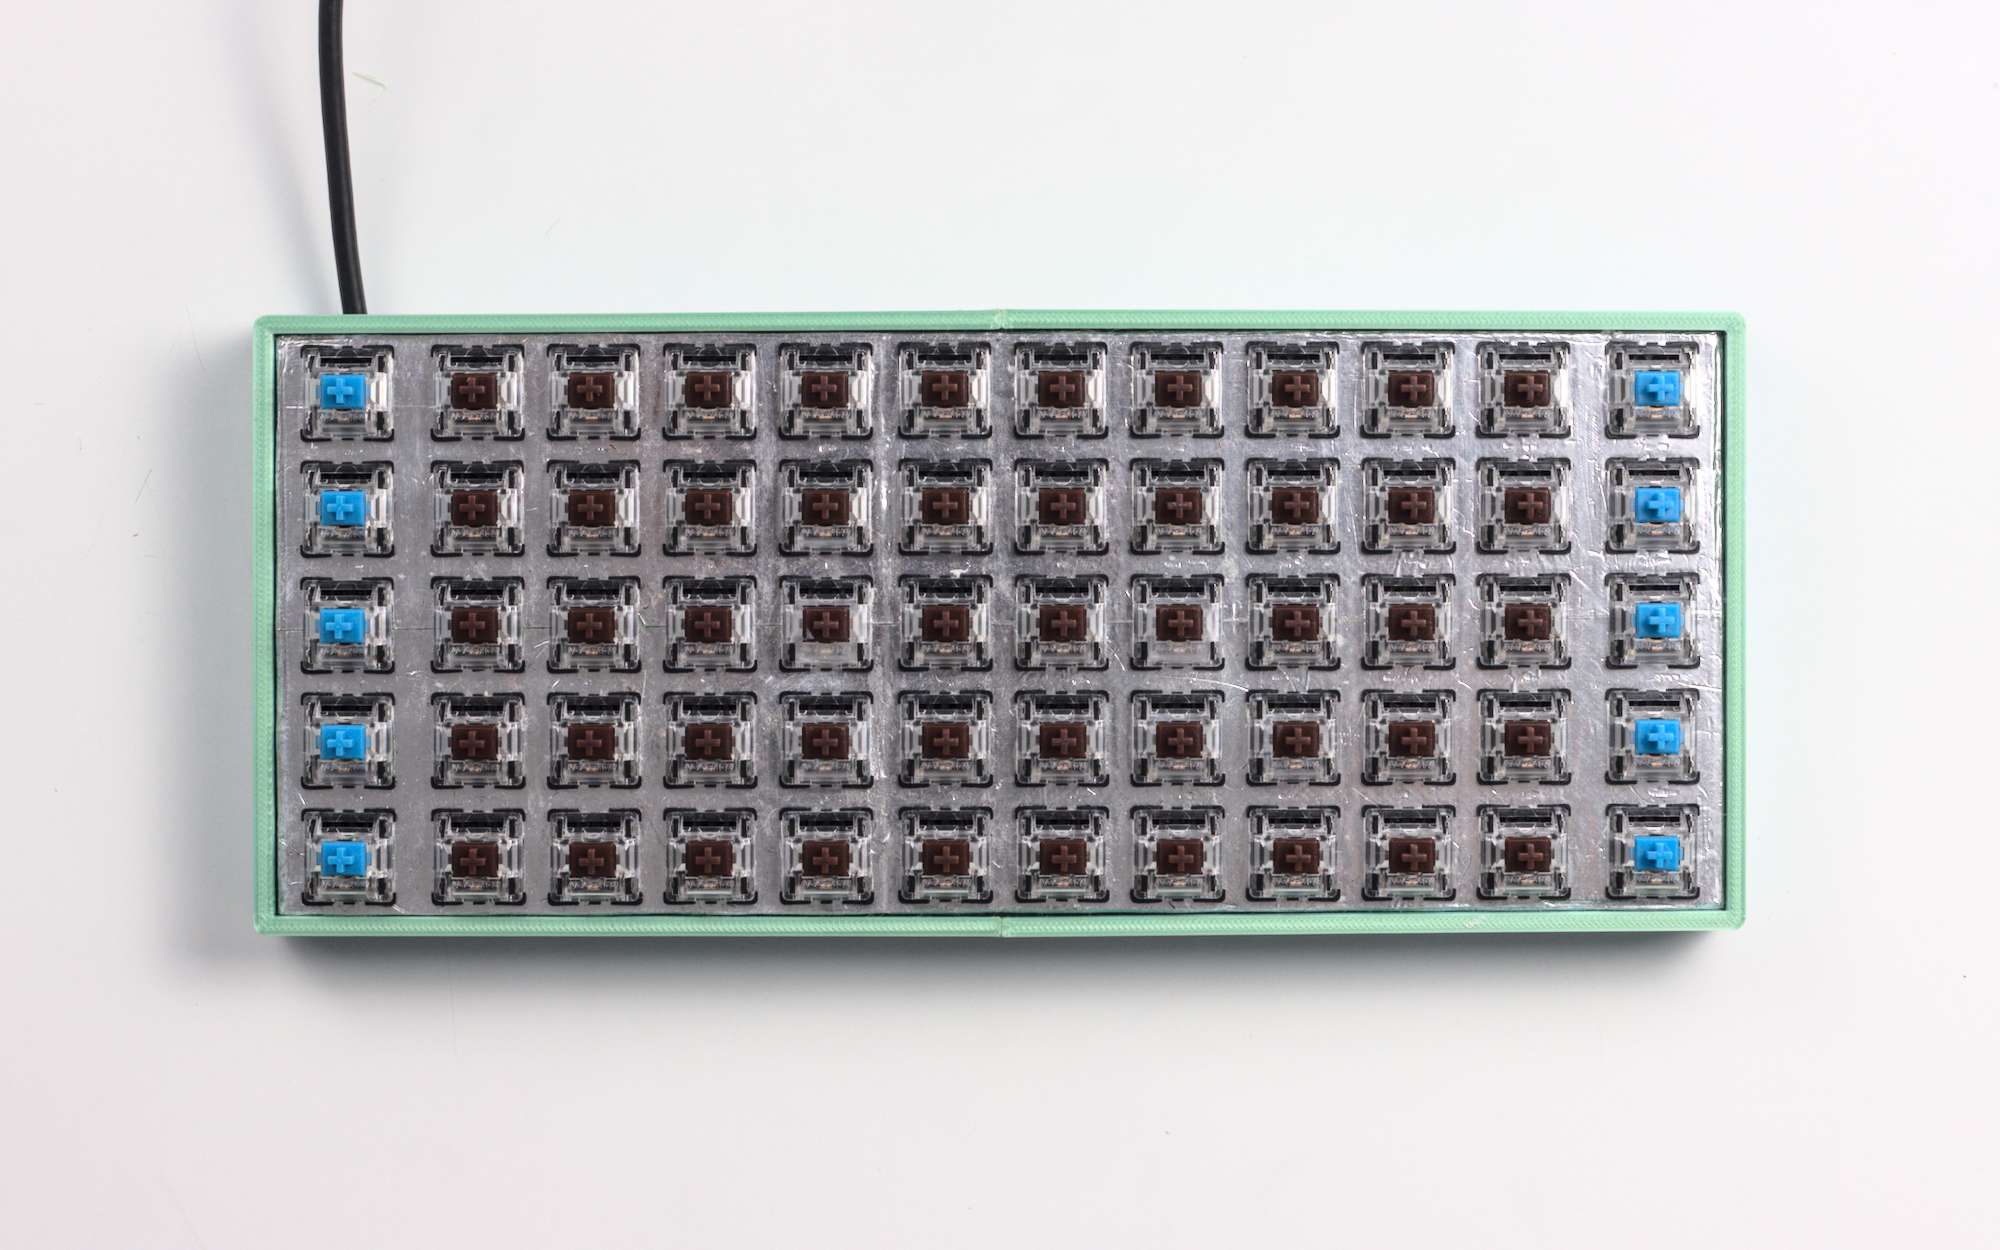 Top view of 12x5 grid ortholinear keyboard